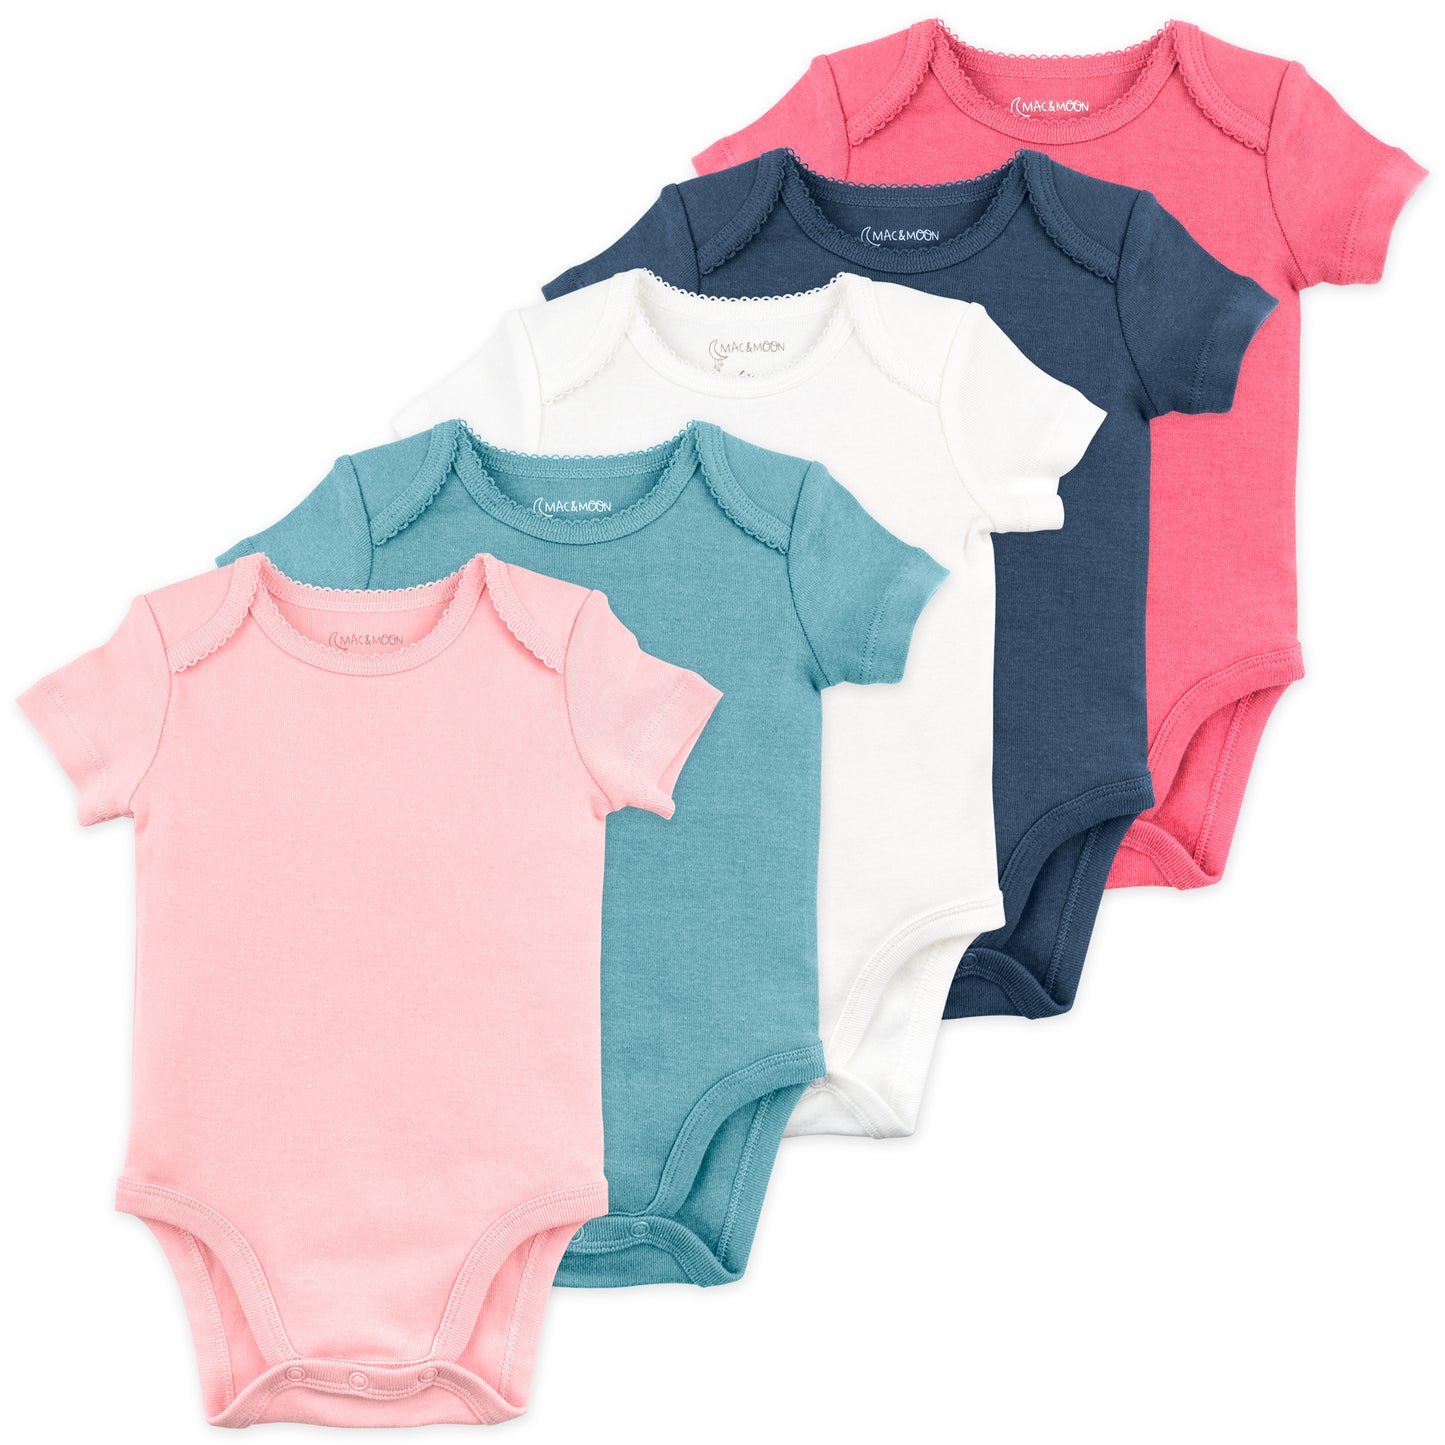 5-Pack Organic Cotton Bodysuit in Bunny Floral Colors